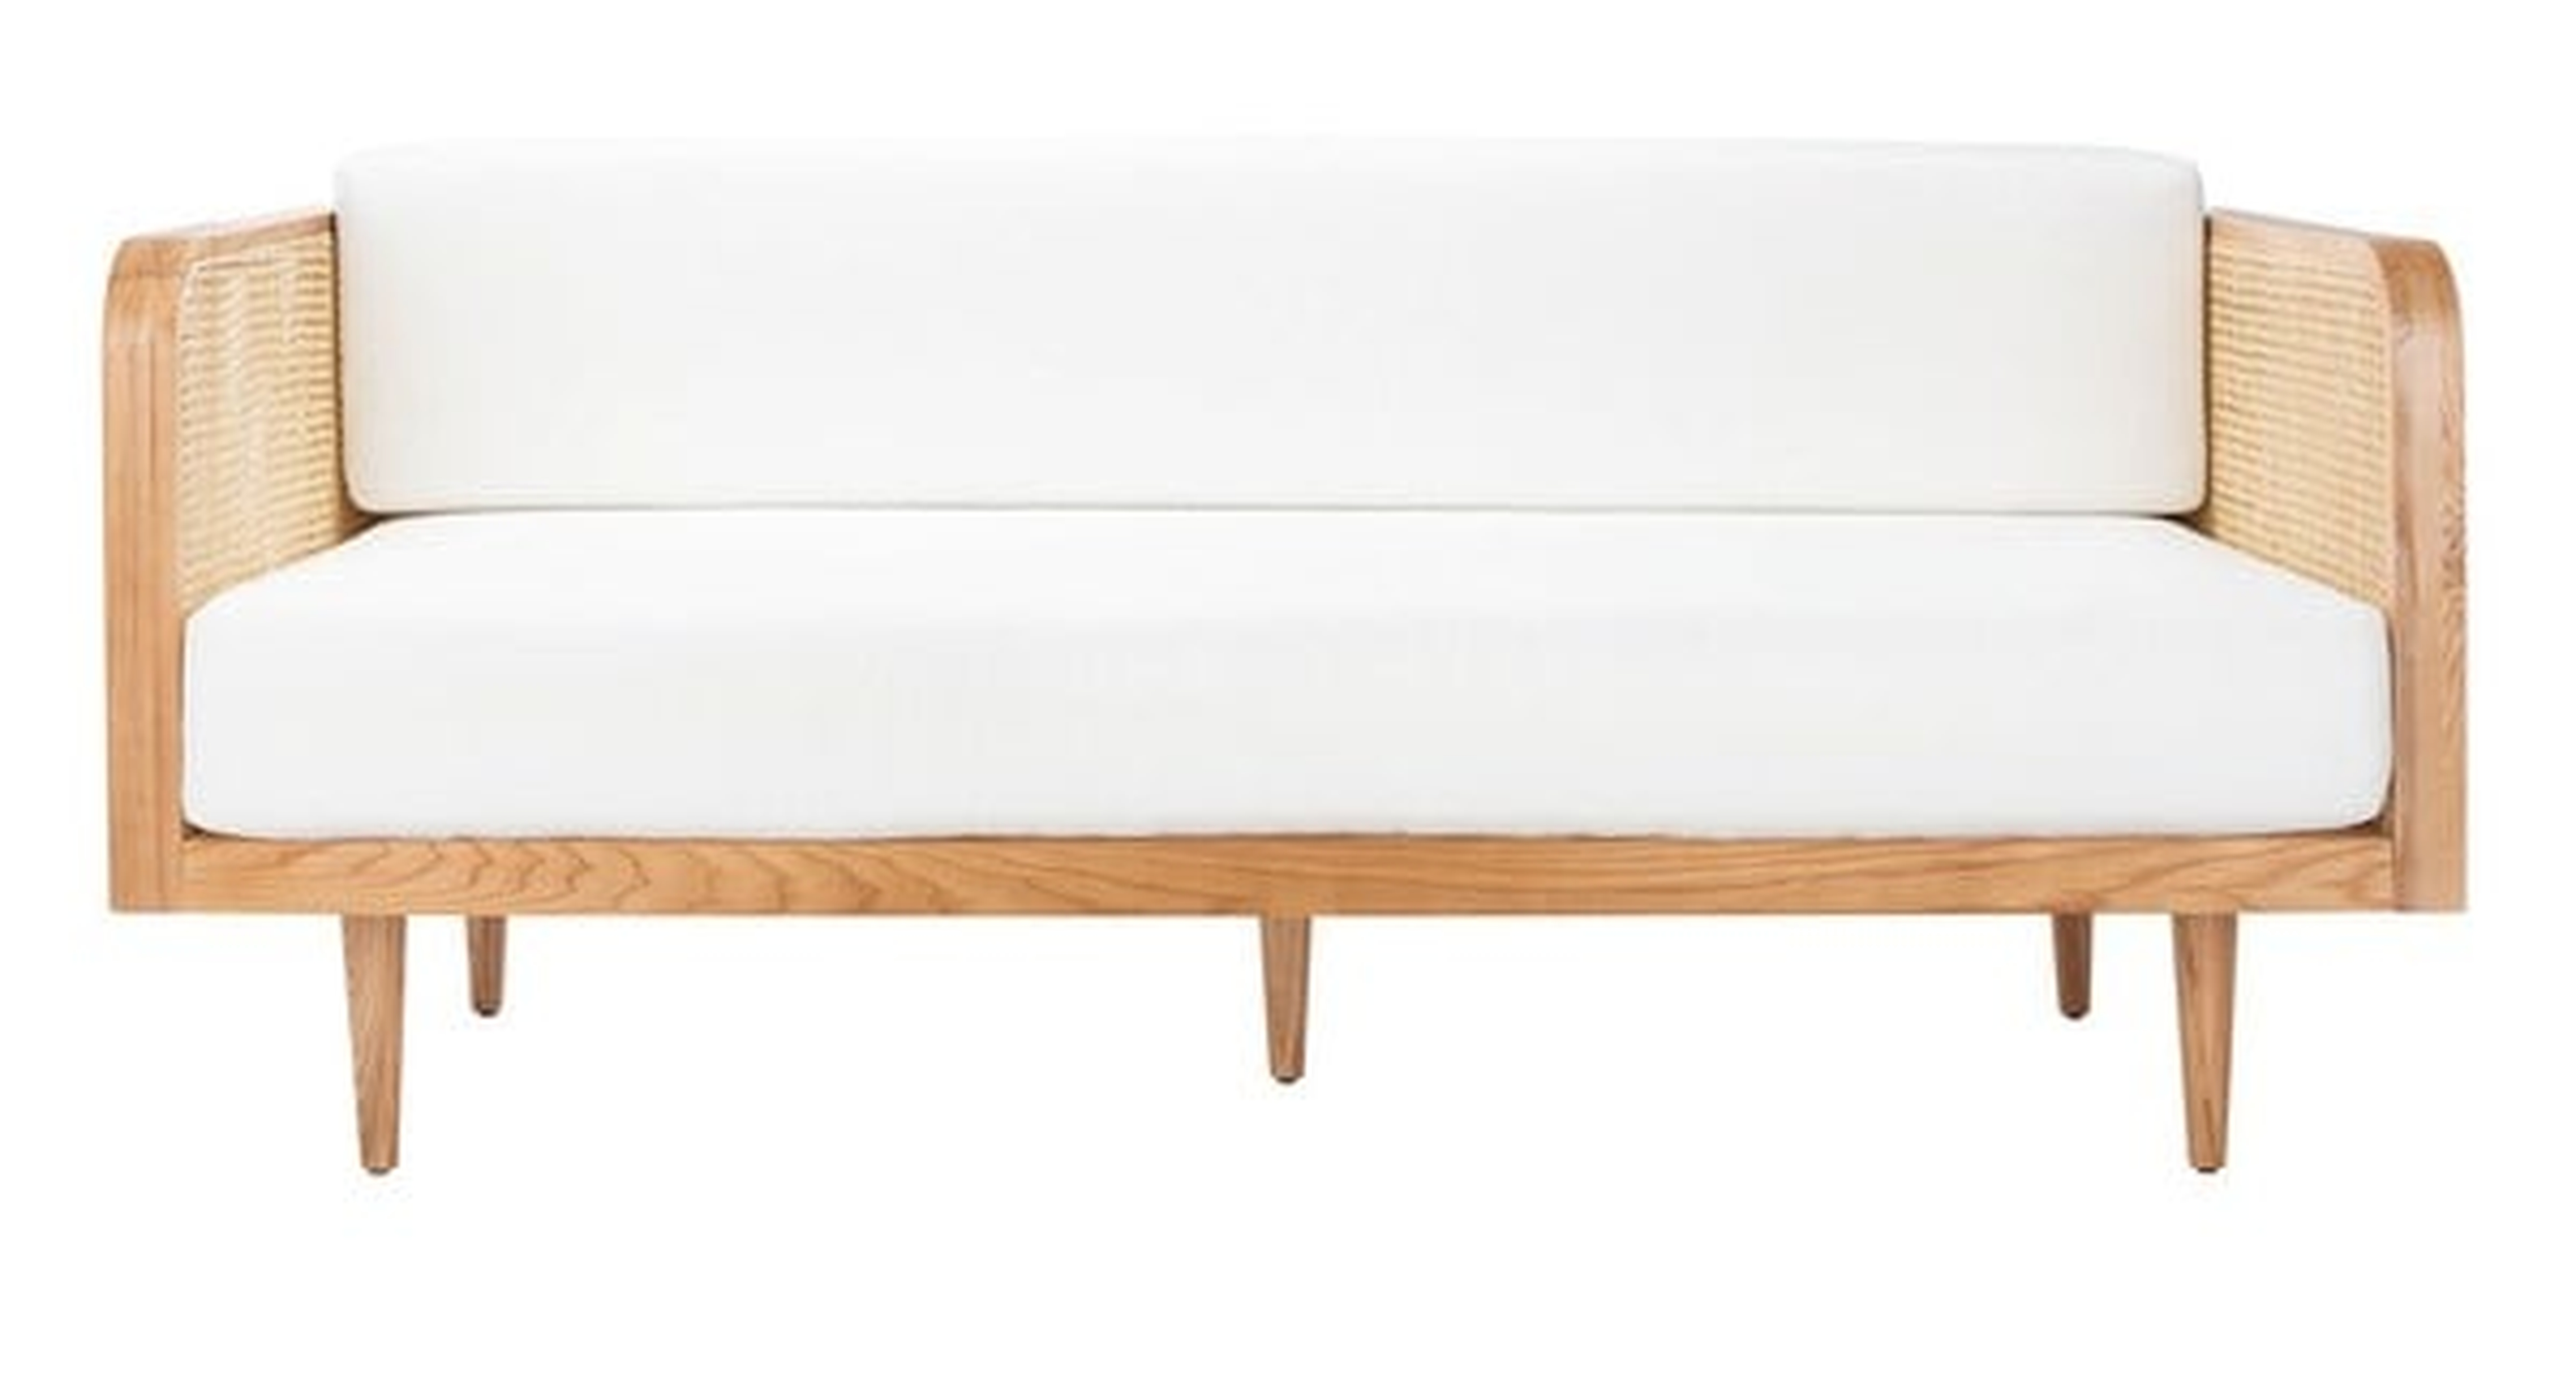 Helena French Cane Daybed  - Natural - Arlo Home - Arlo Home